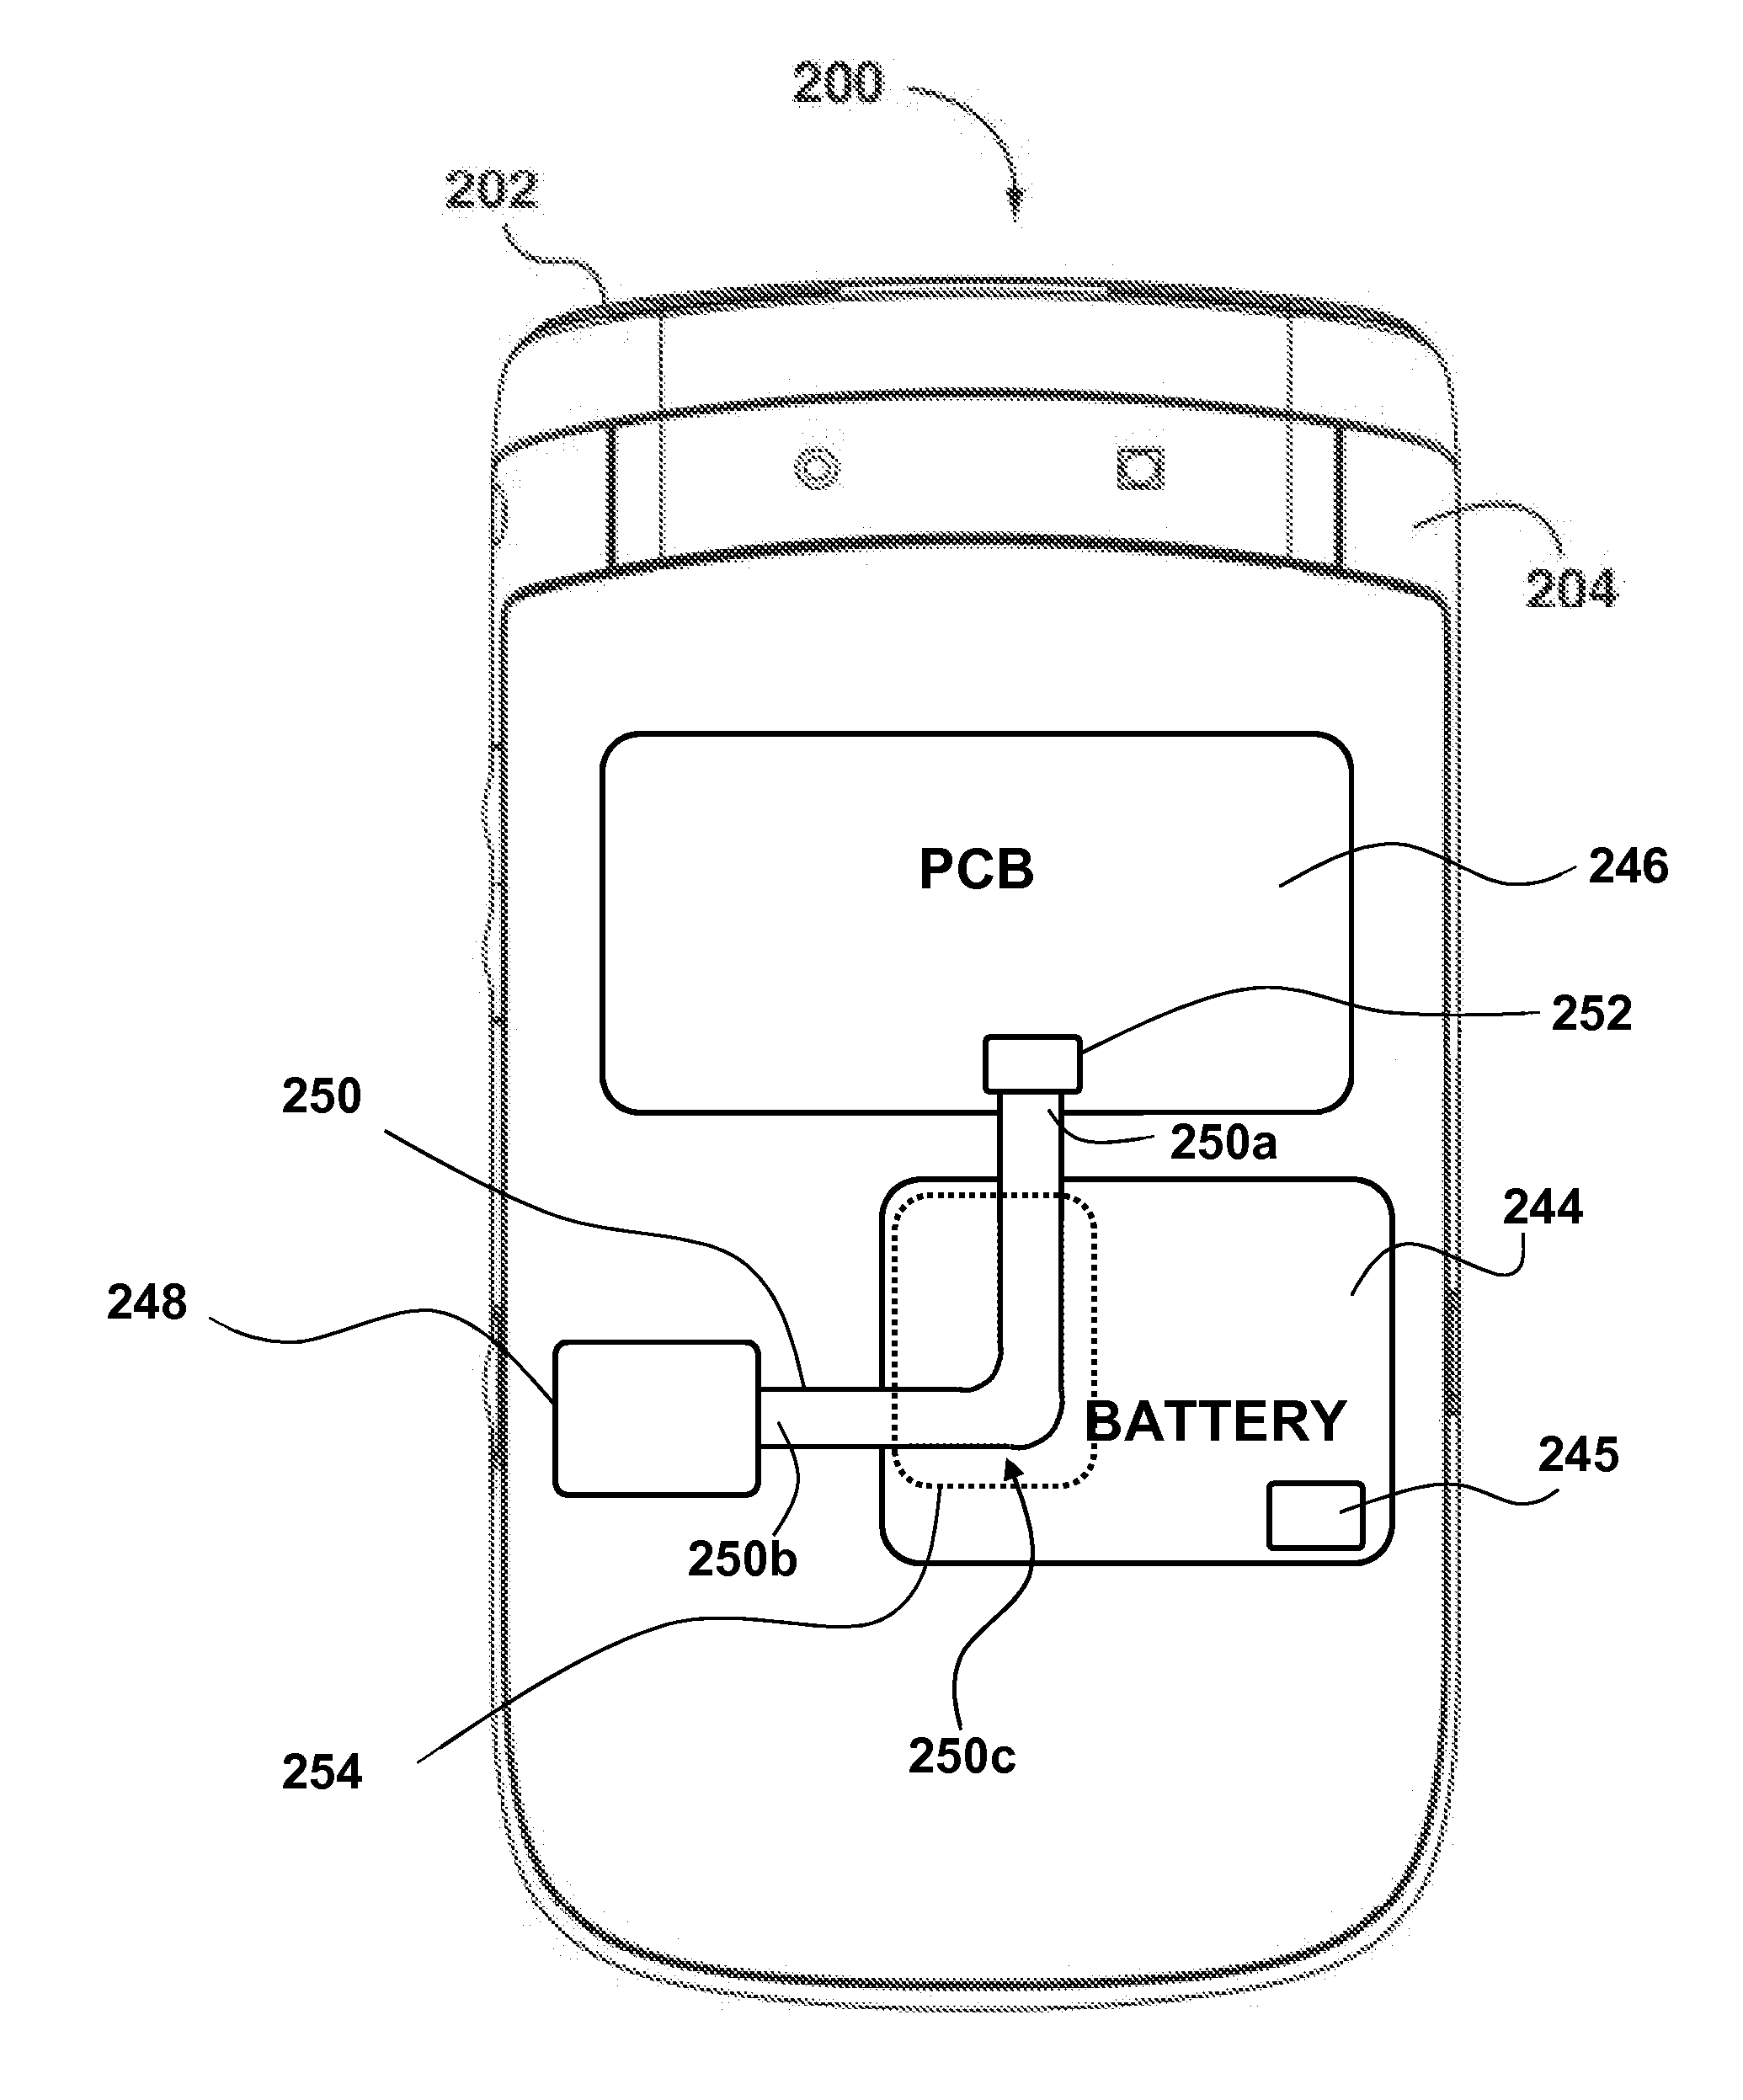 Methods and apparatus for detecting unauthorized batteries or tampering by monitoring a thermal profile